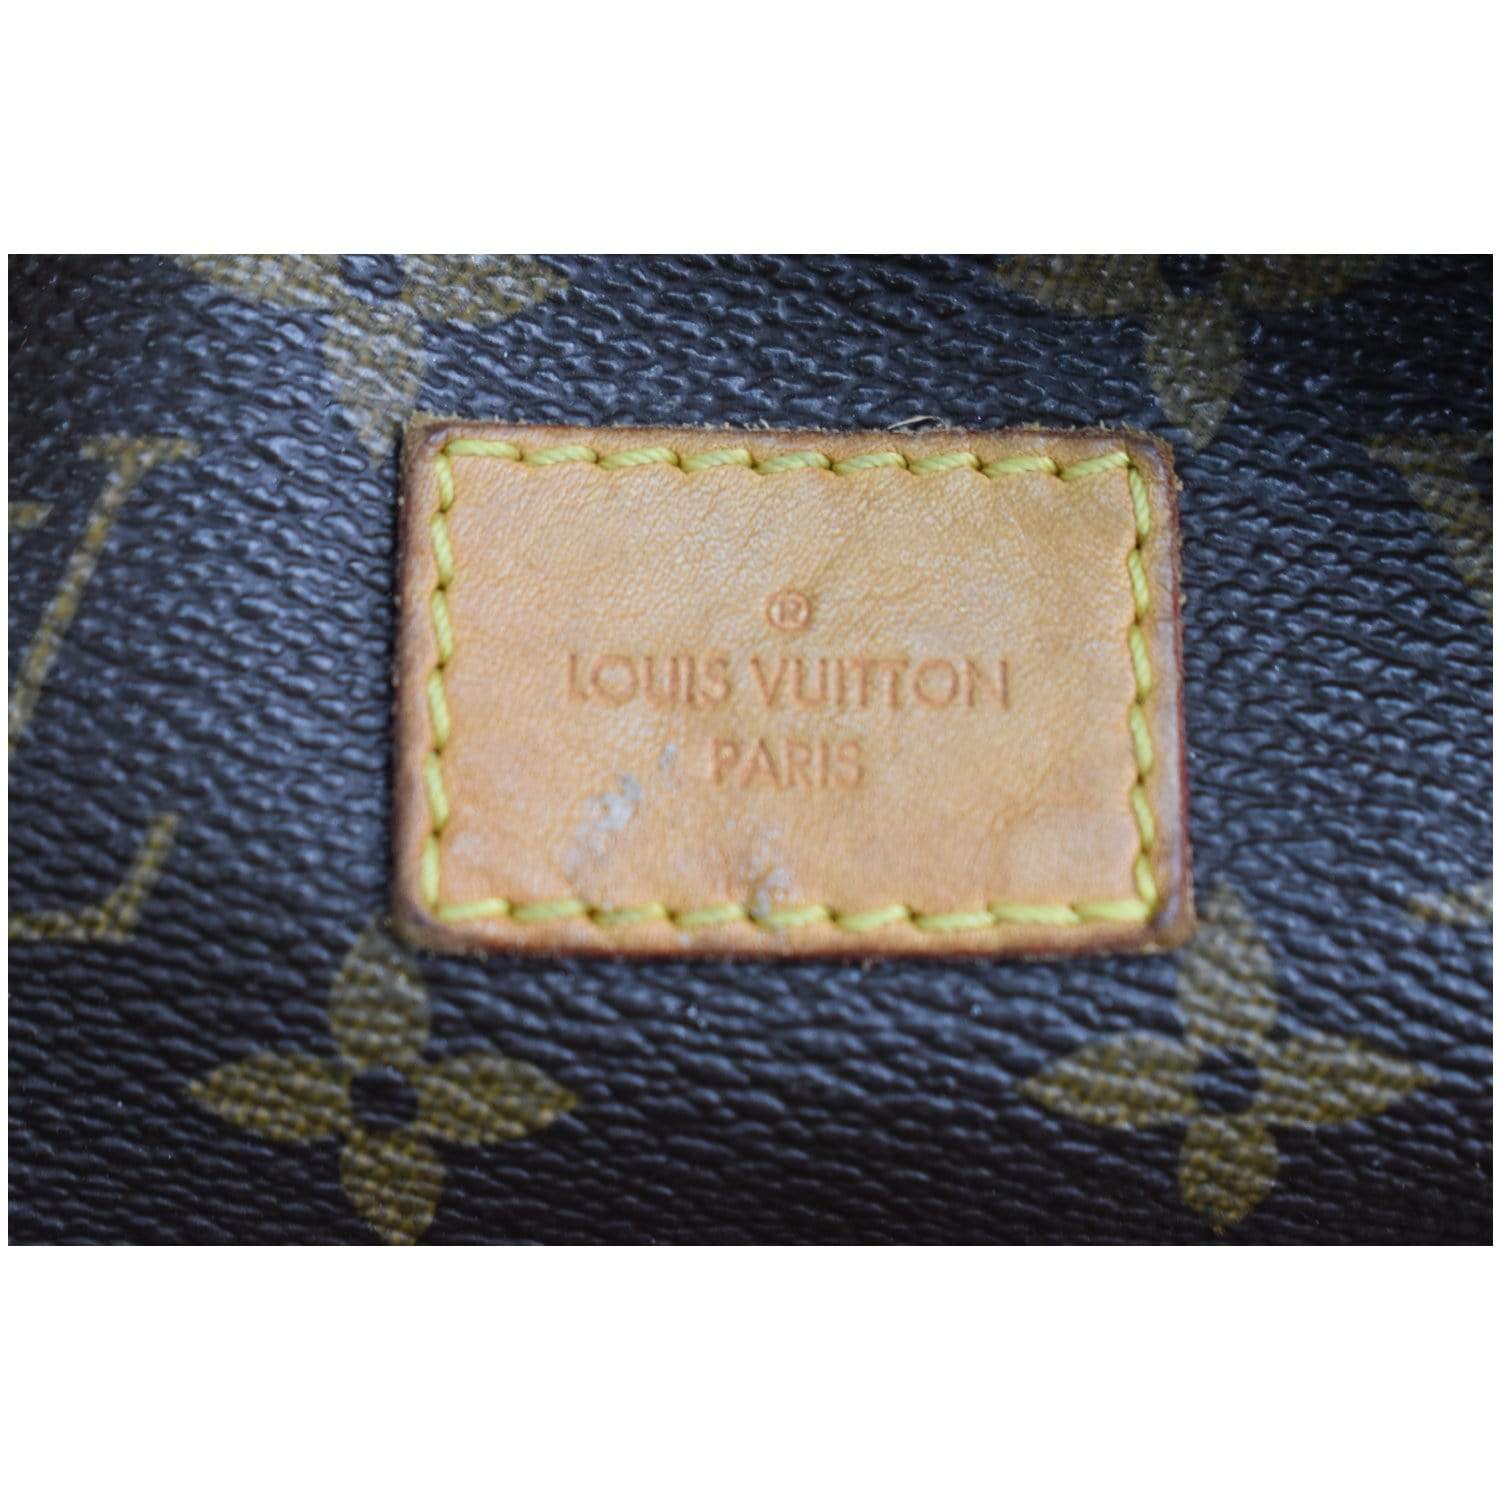 My Louis Vuitton “Personalized” Collection 